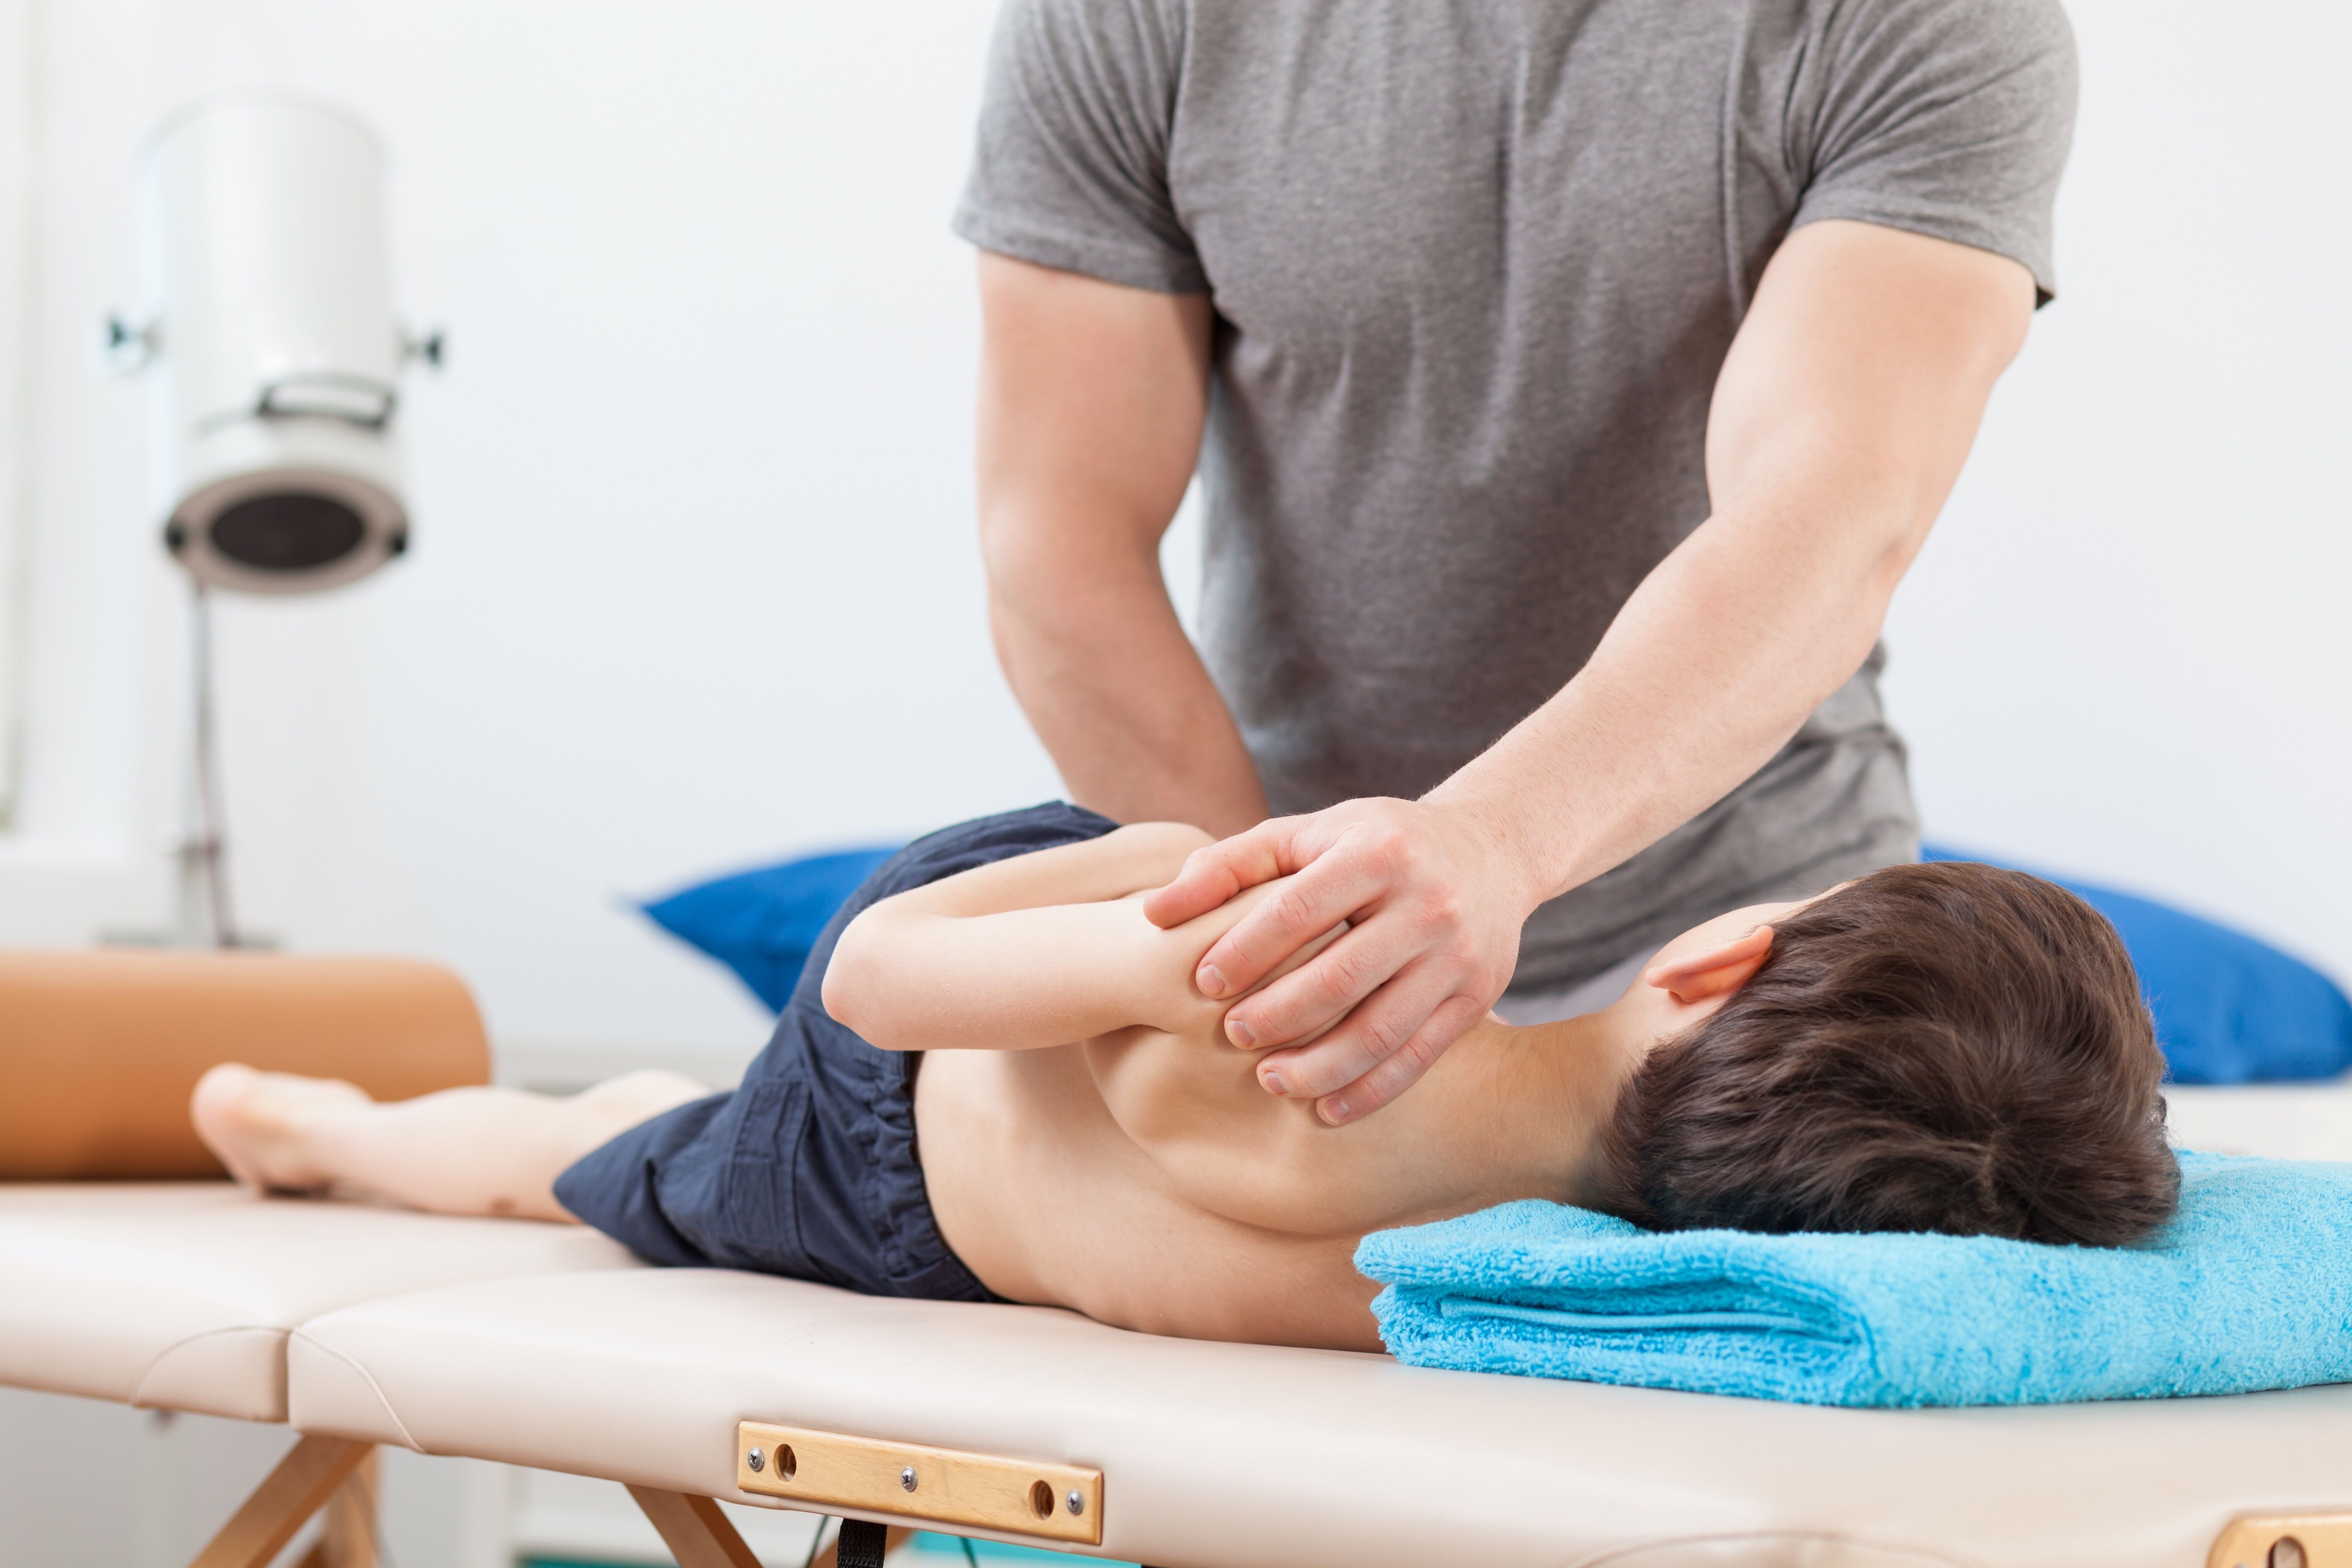 6 Common Myths Busted About Chiropractic Care